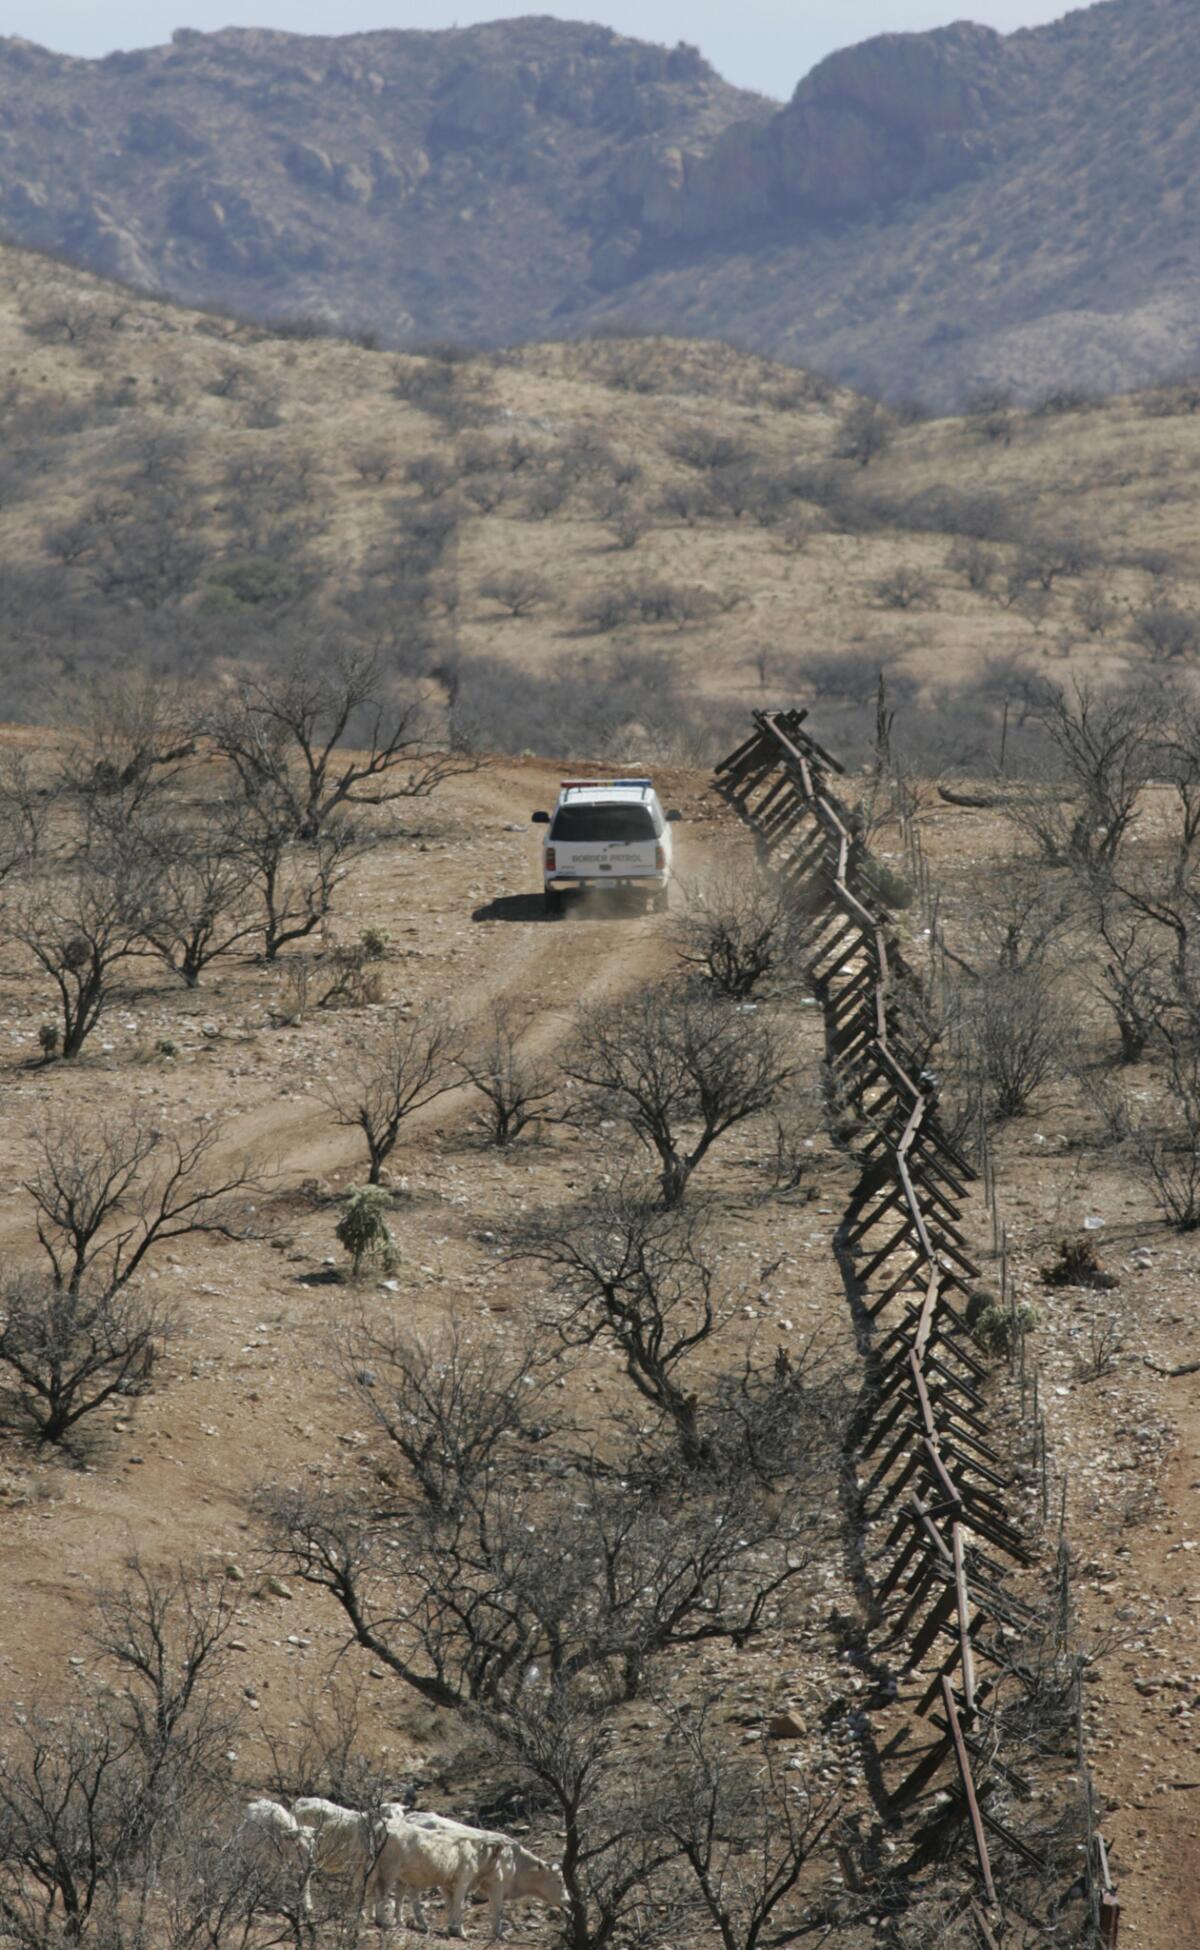 Feb. 28, 2007: A U.S. Border Patrol agent follows a vehicle barrier that defines the border to about four miles east of Sasabe, Ariz. Farther east there is no border barrier, but agents observe the remote desert area with aerial drones and ground sensors.